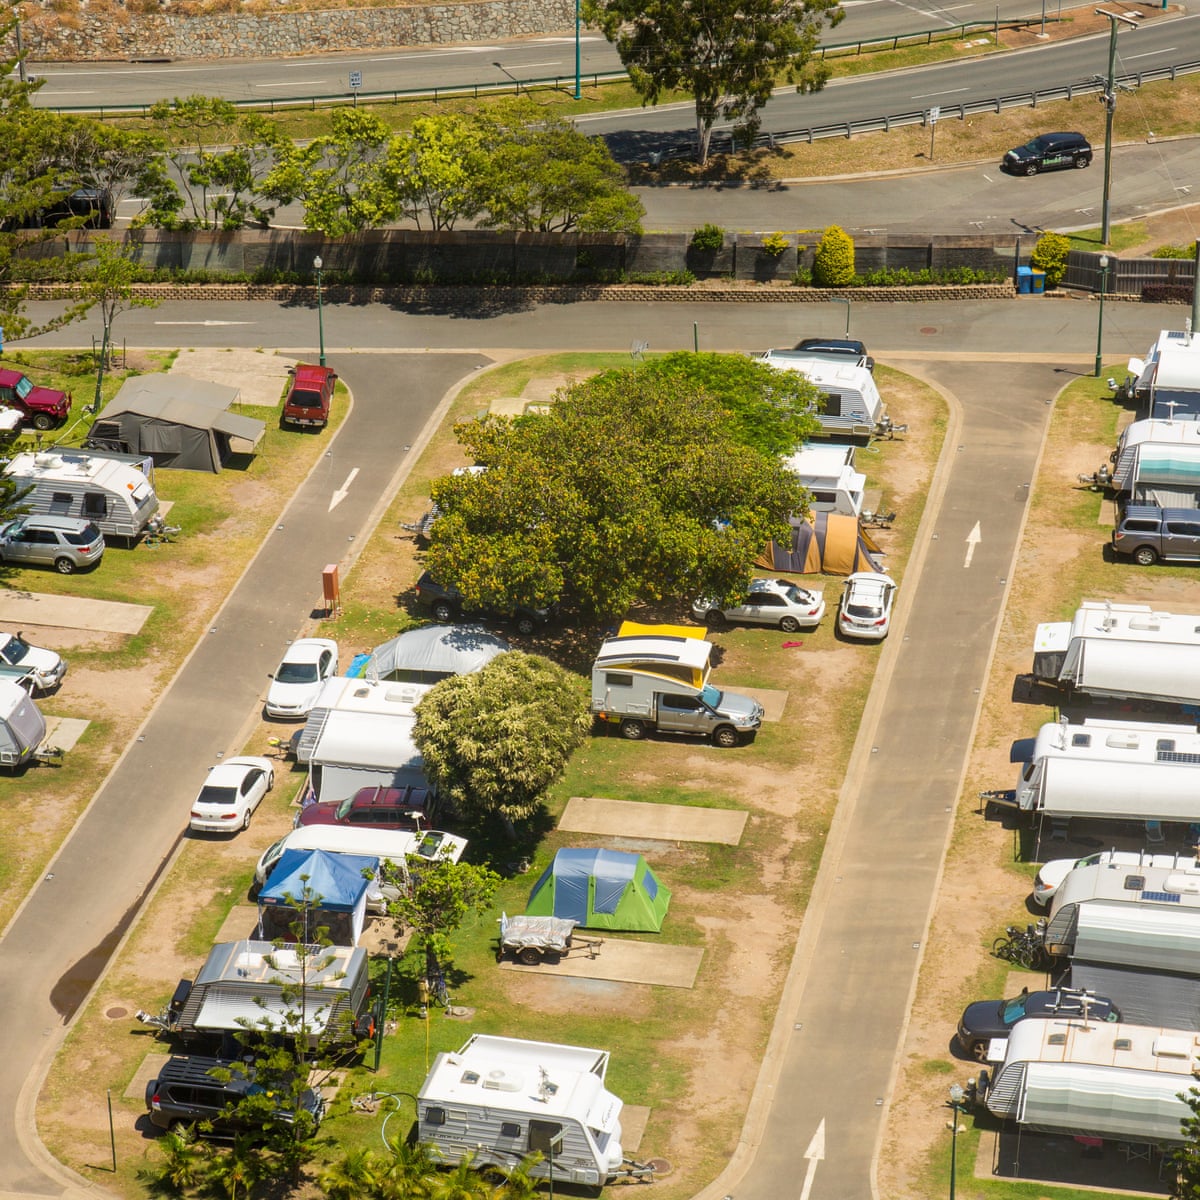 caravan parks inundated with calls for long-term stays amid chronic housing crisis | Queensland | Guardian